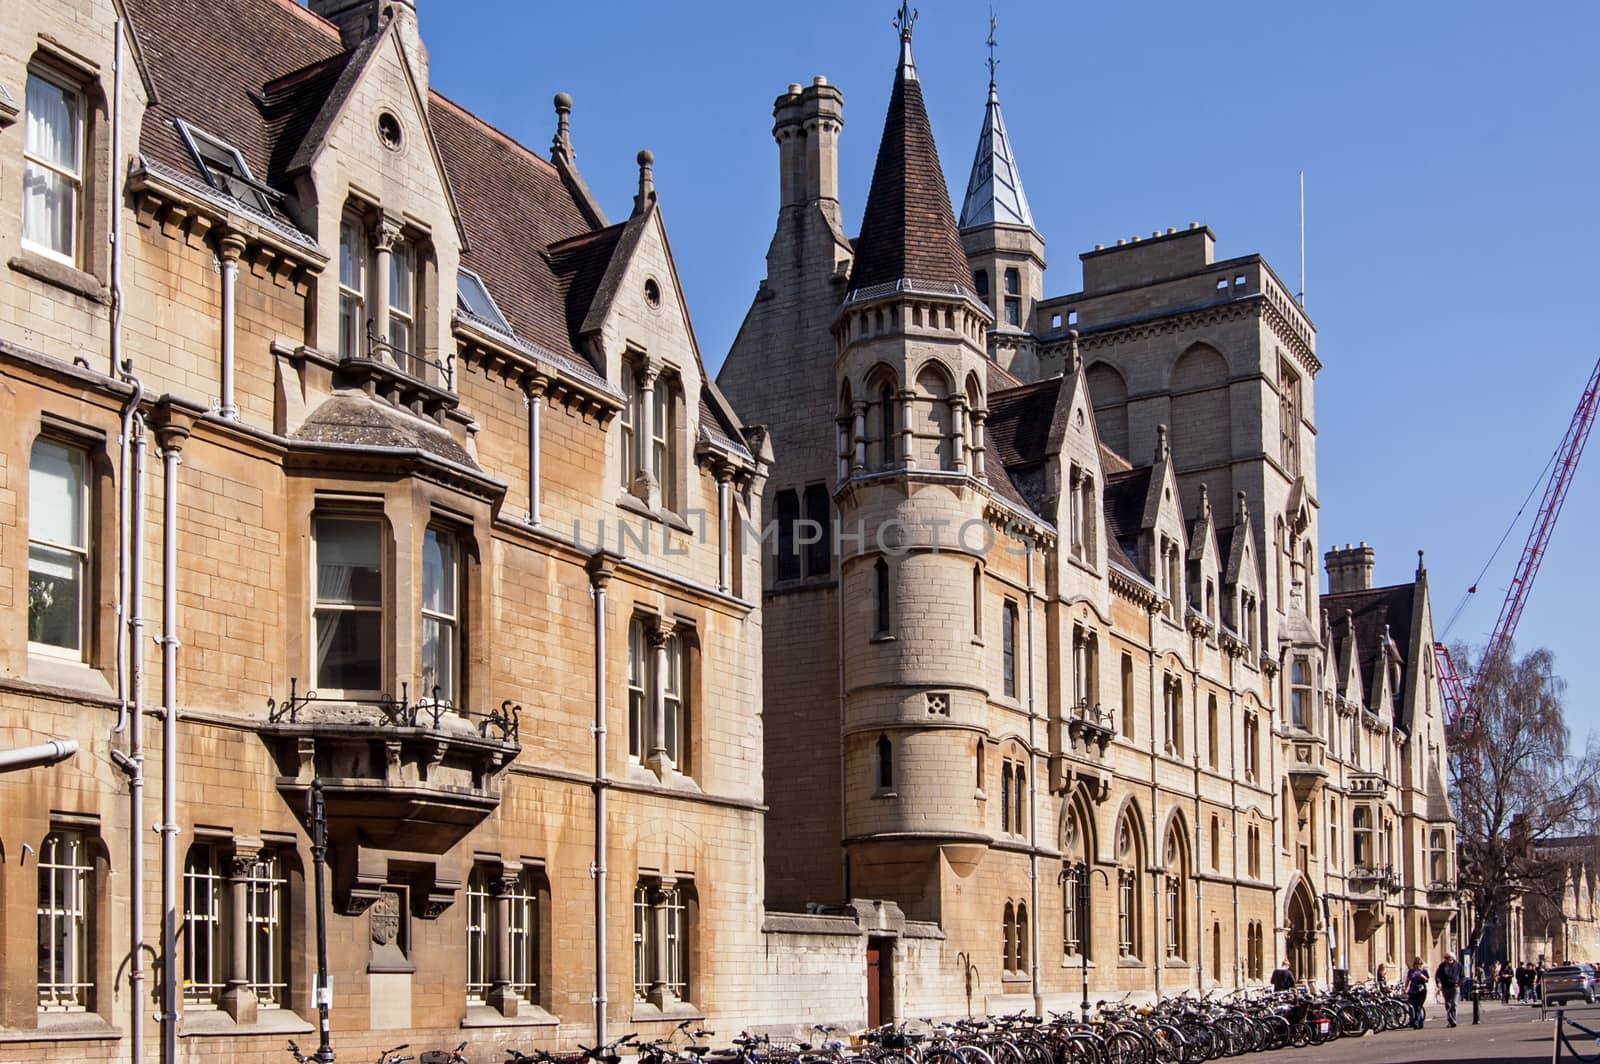 Oxford, UK - March 26, 2012:  View from Broad Street of Balliol College in the centre of Oxford, UK.